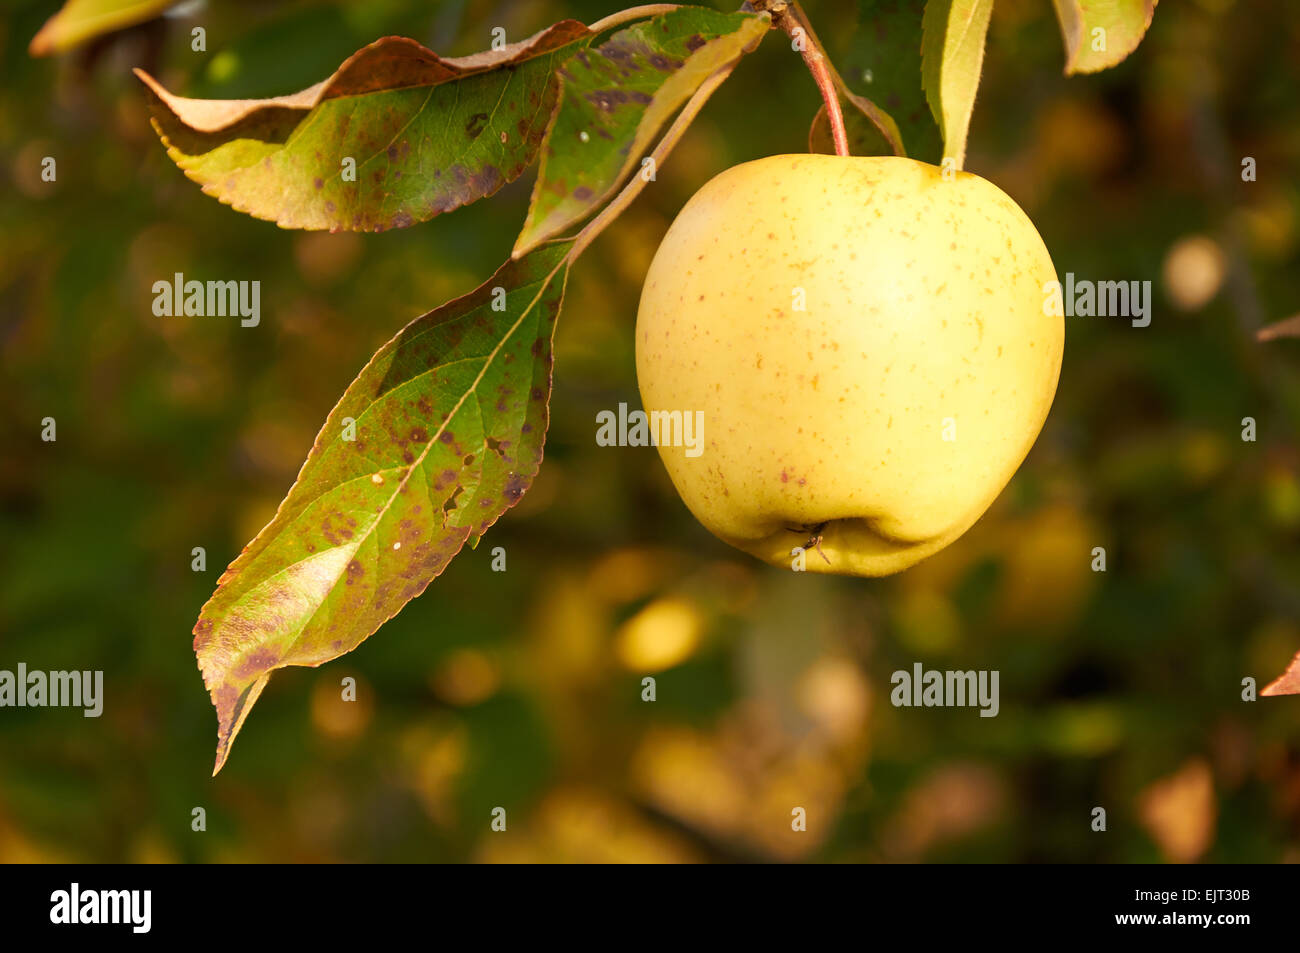 Ripe green yellow apple on the branch Stock Photo